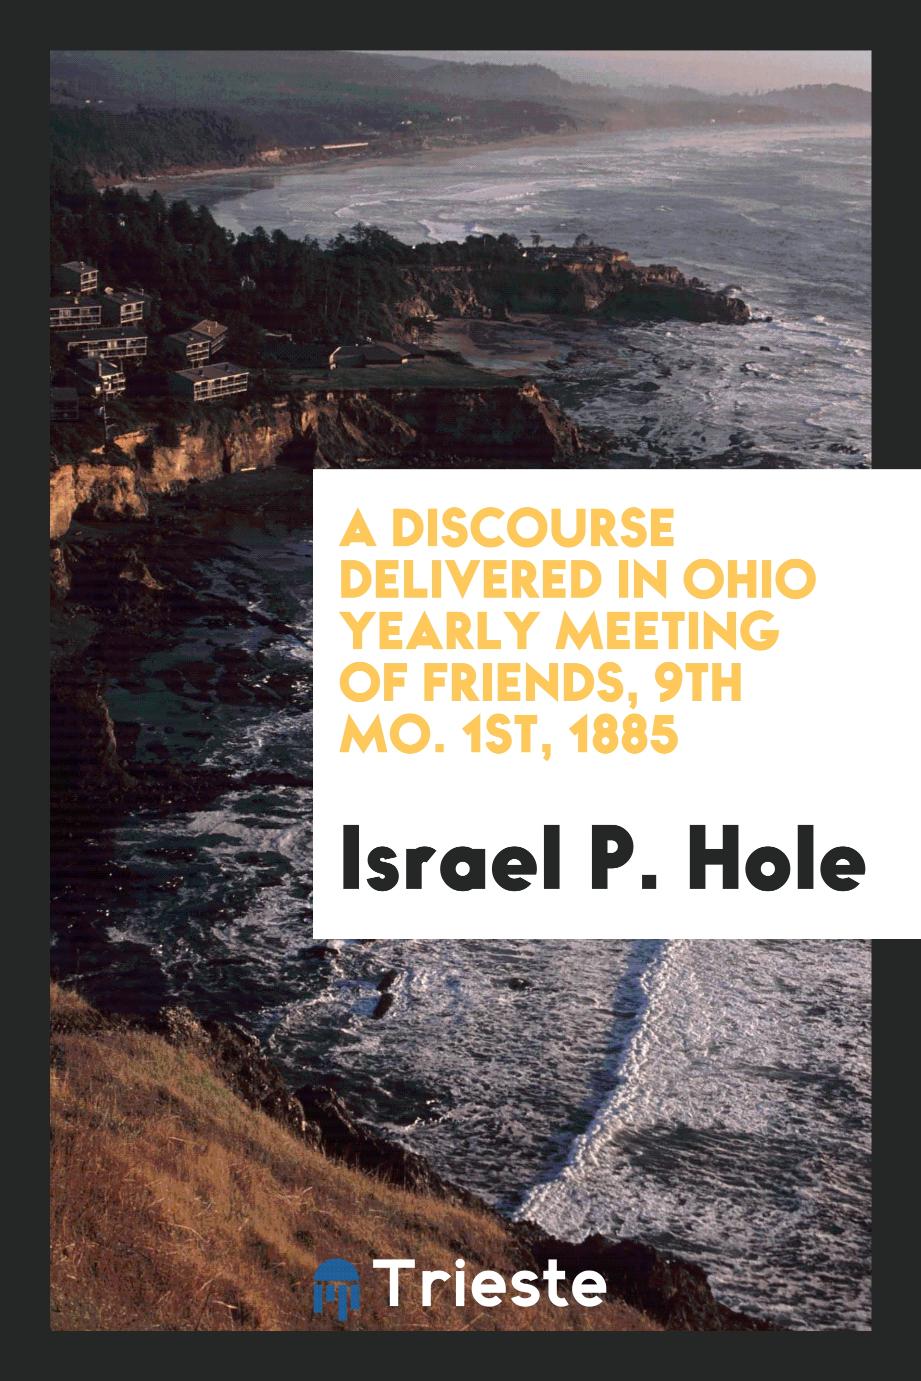 A Discourse Delivered in Ohio Yearly Meeting of Friends, 9th Mo. 1st, 1885